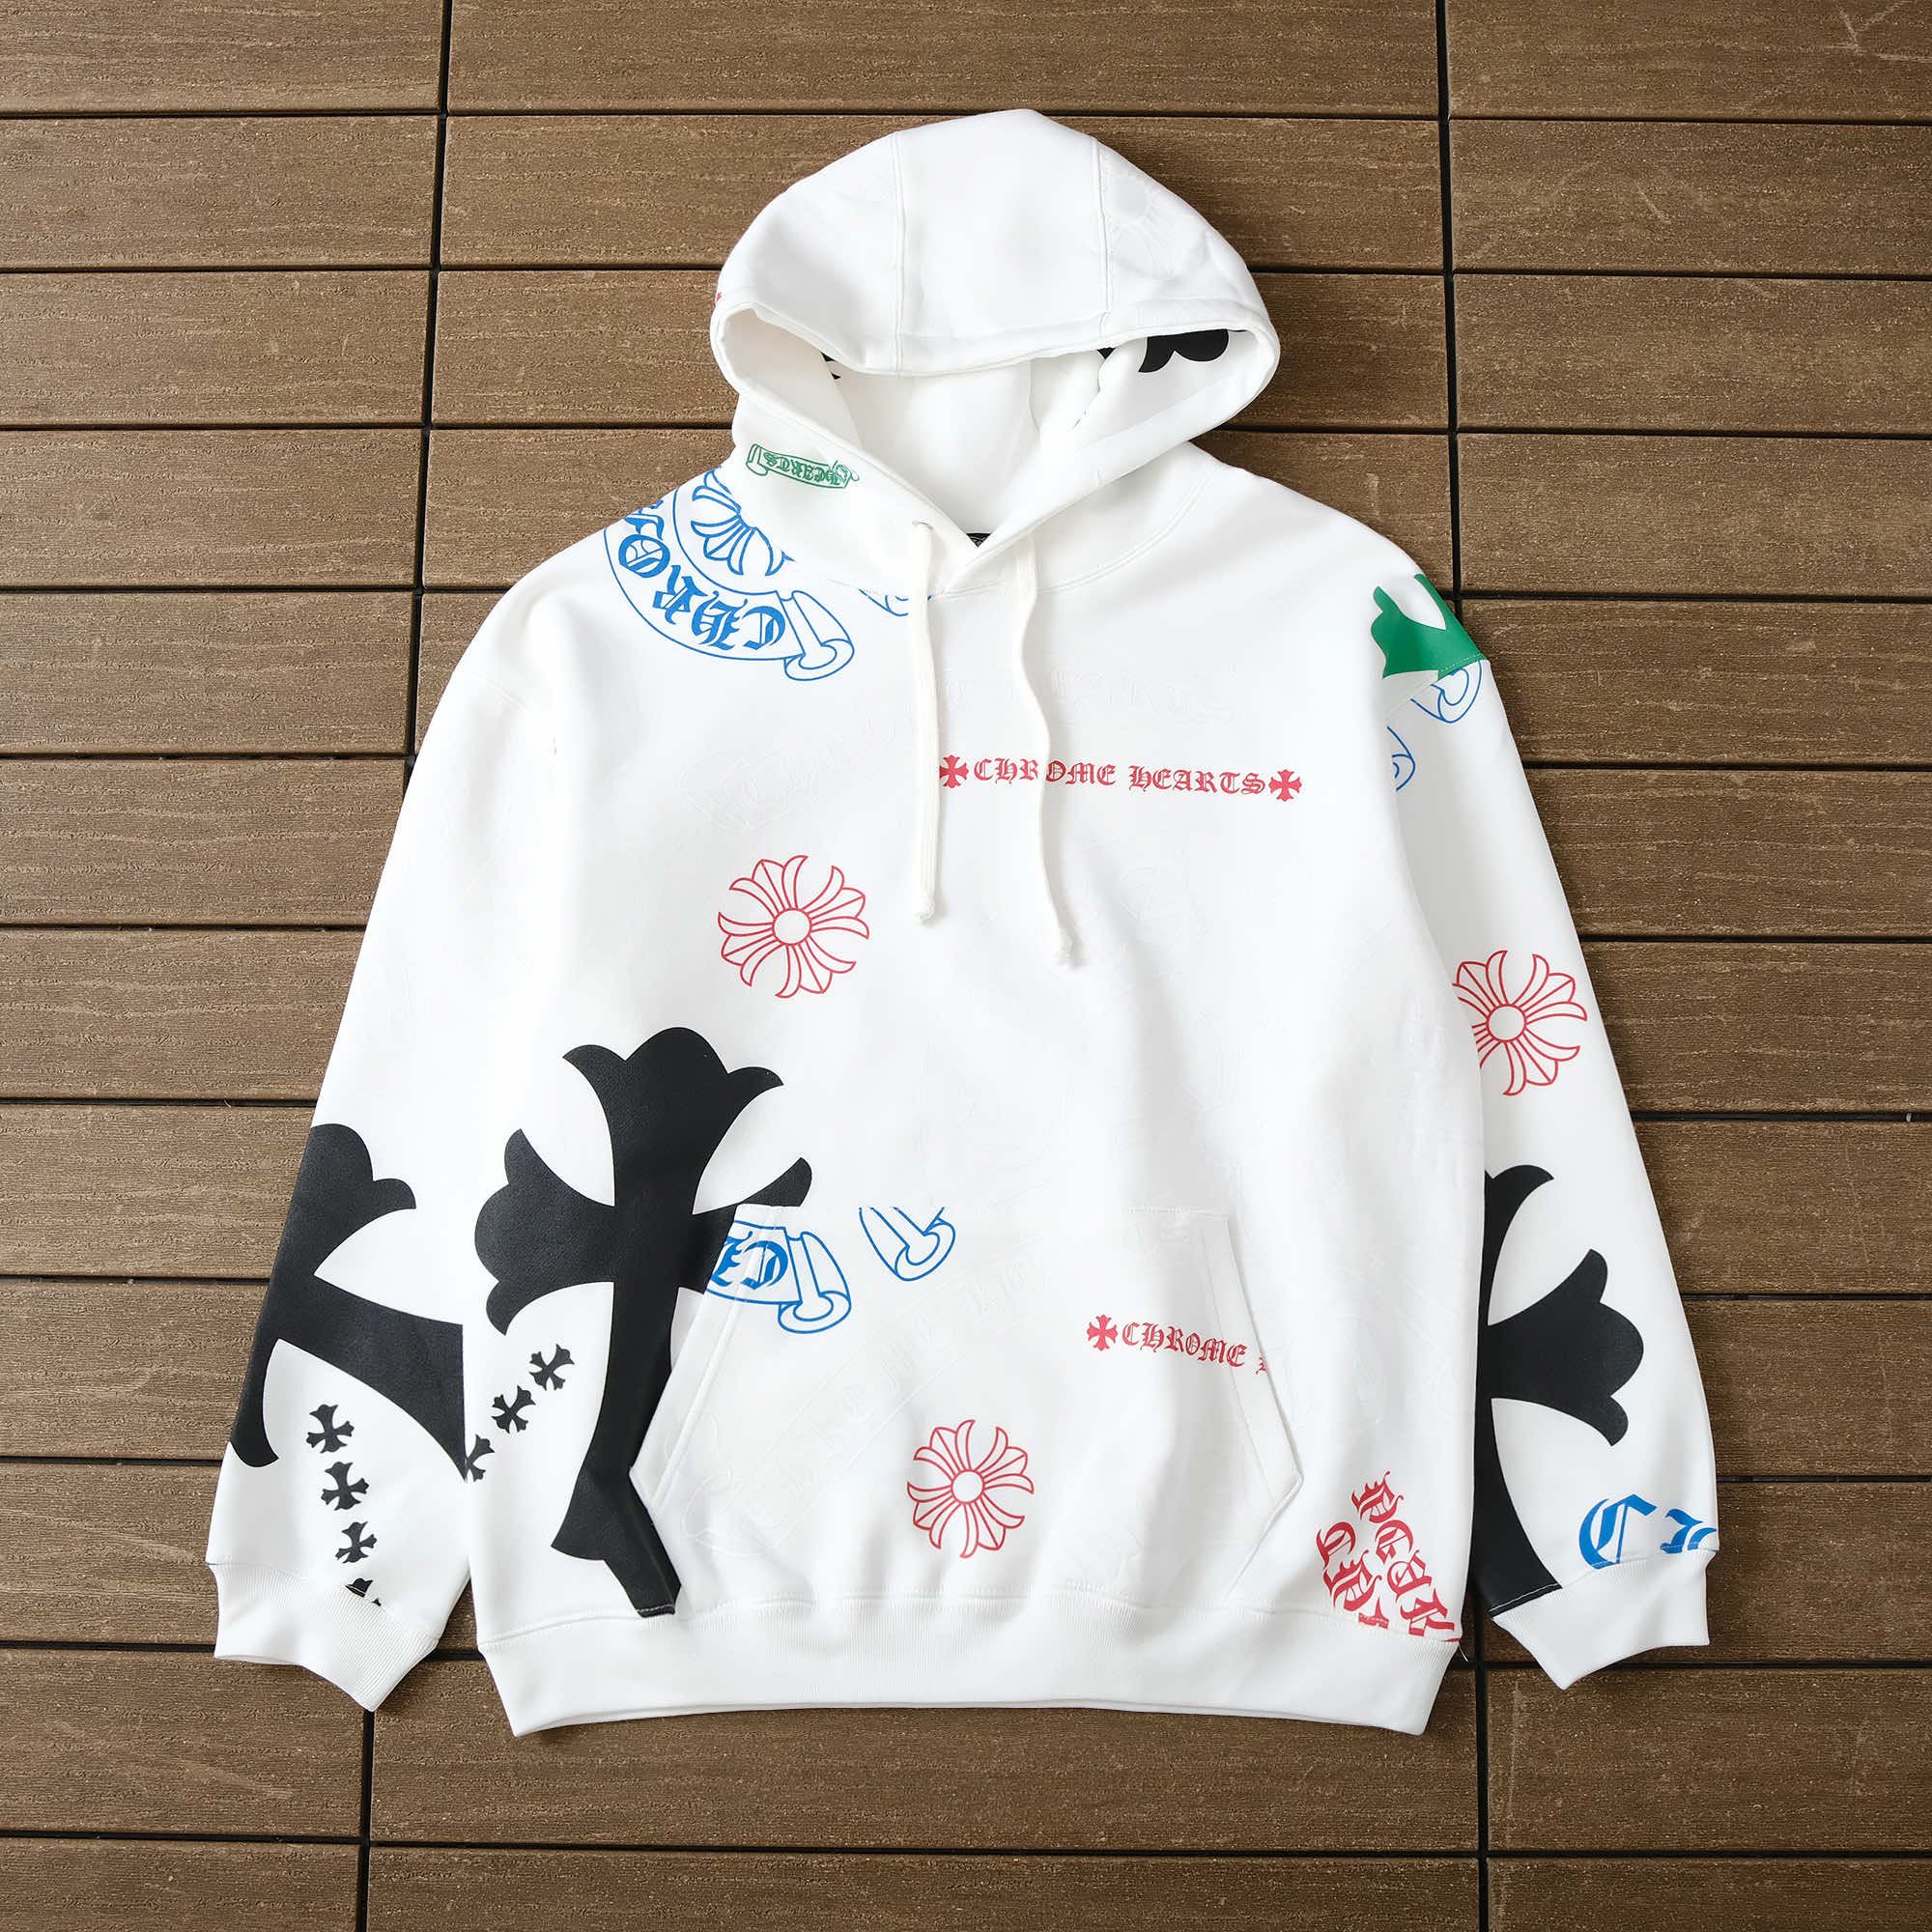 Chrome Hearts Hoodies More Than Just Clothing